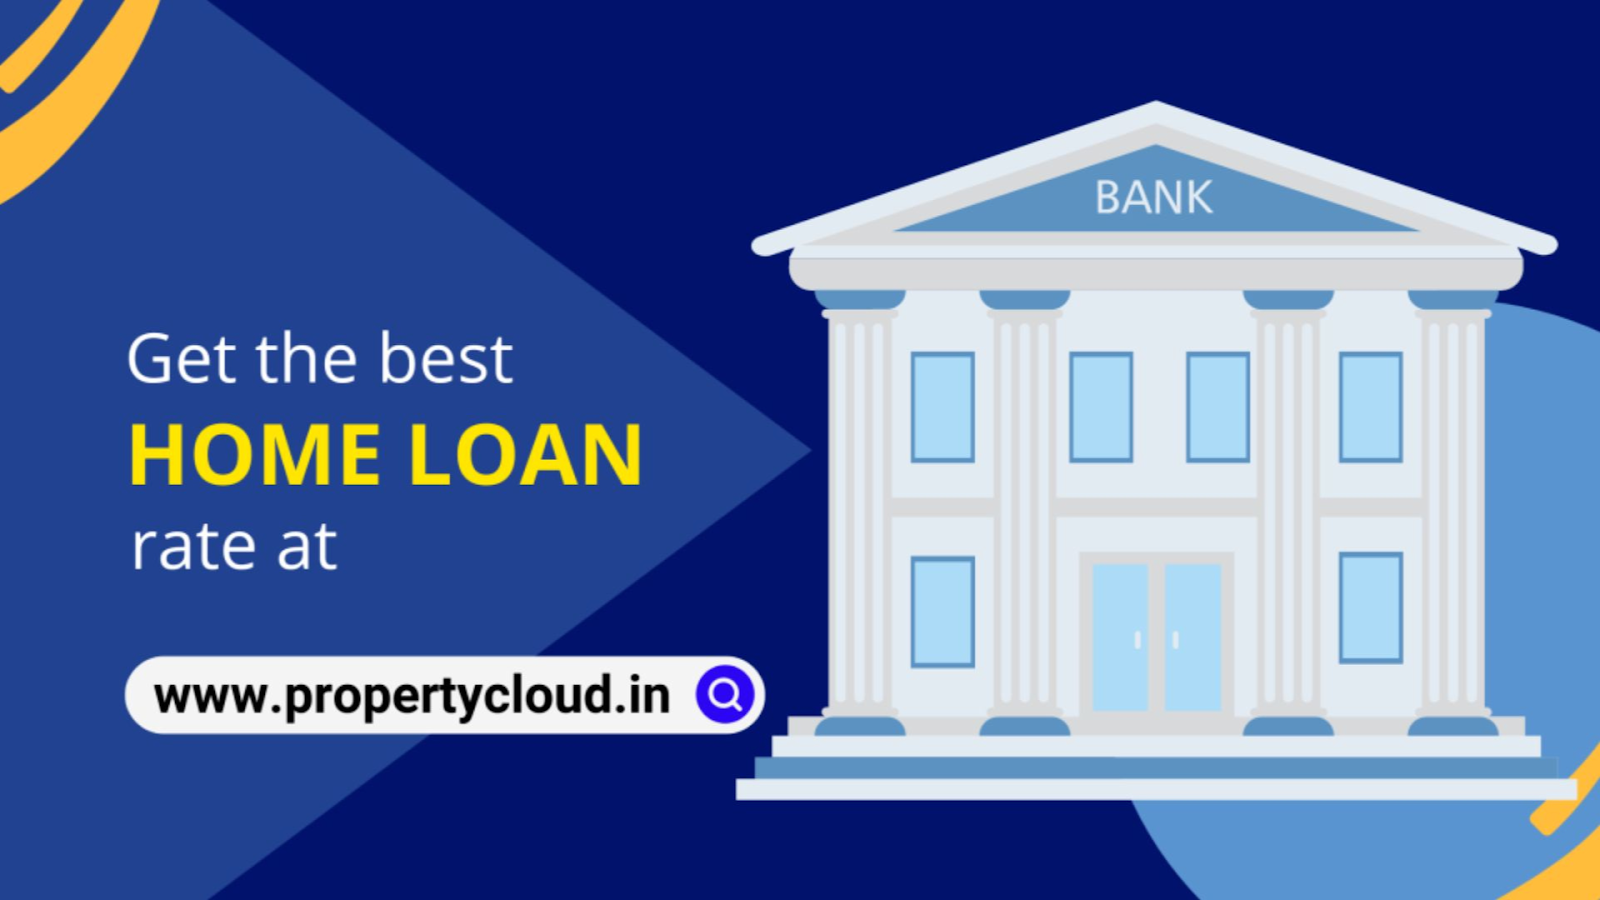 To receive the greatest home loan guidance at the best interest rate, get in contact with PropertyCloud.